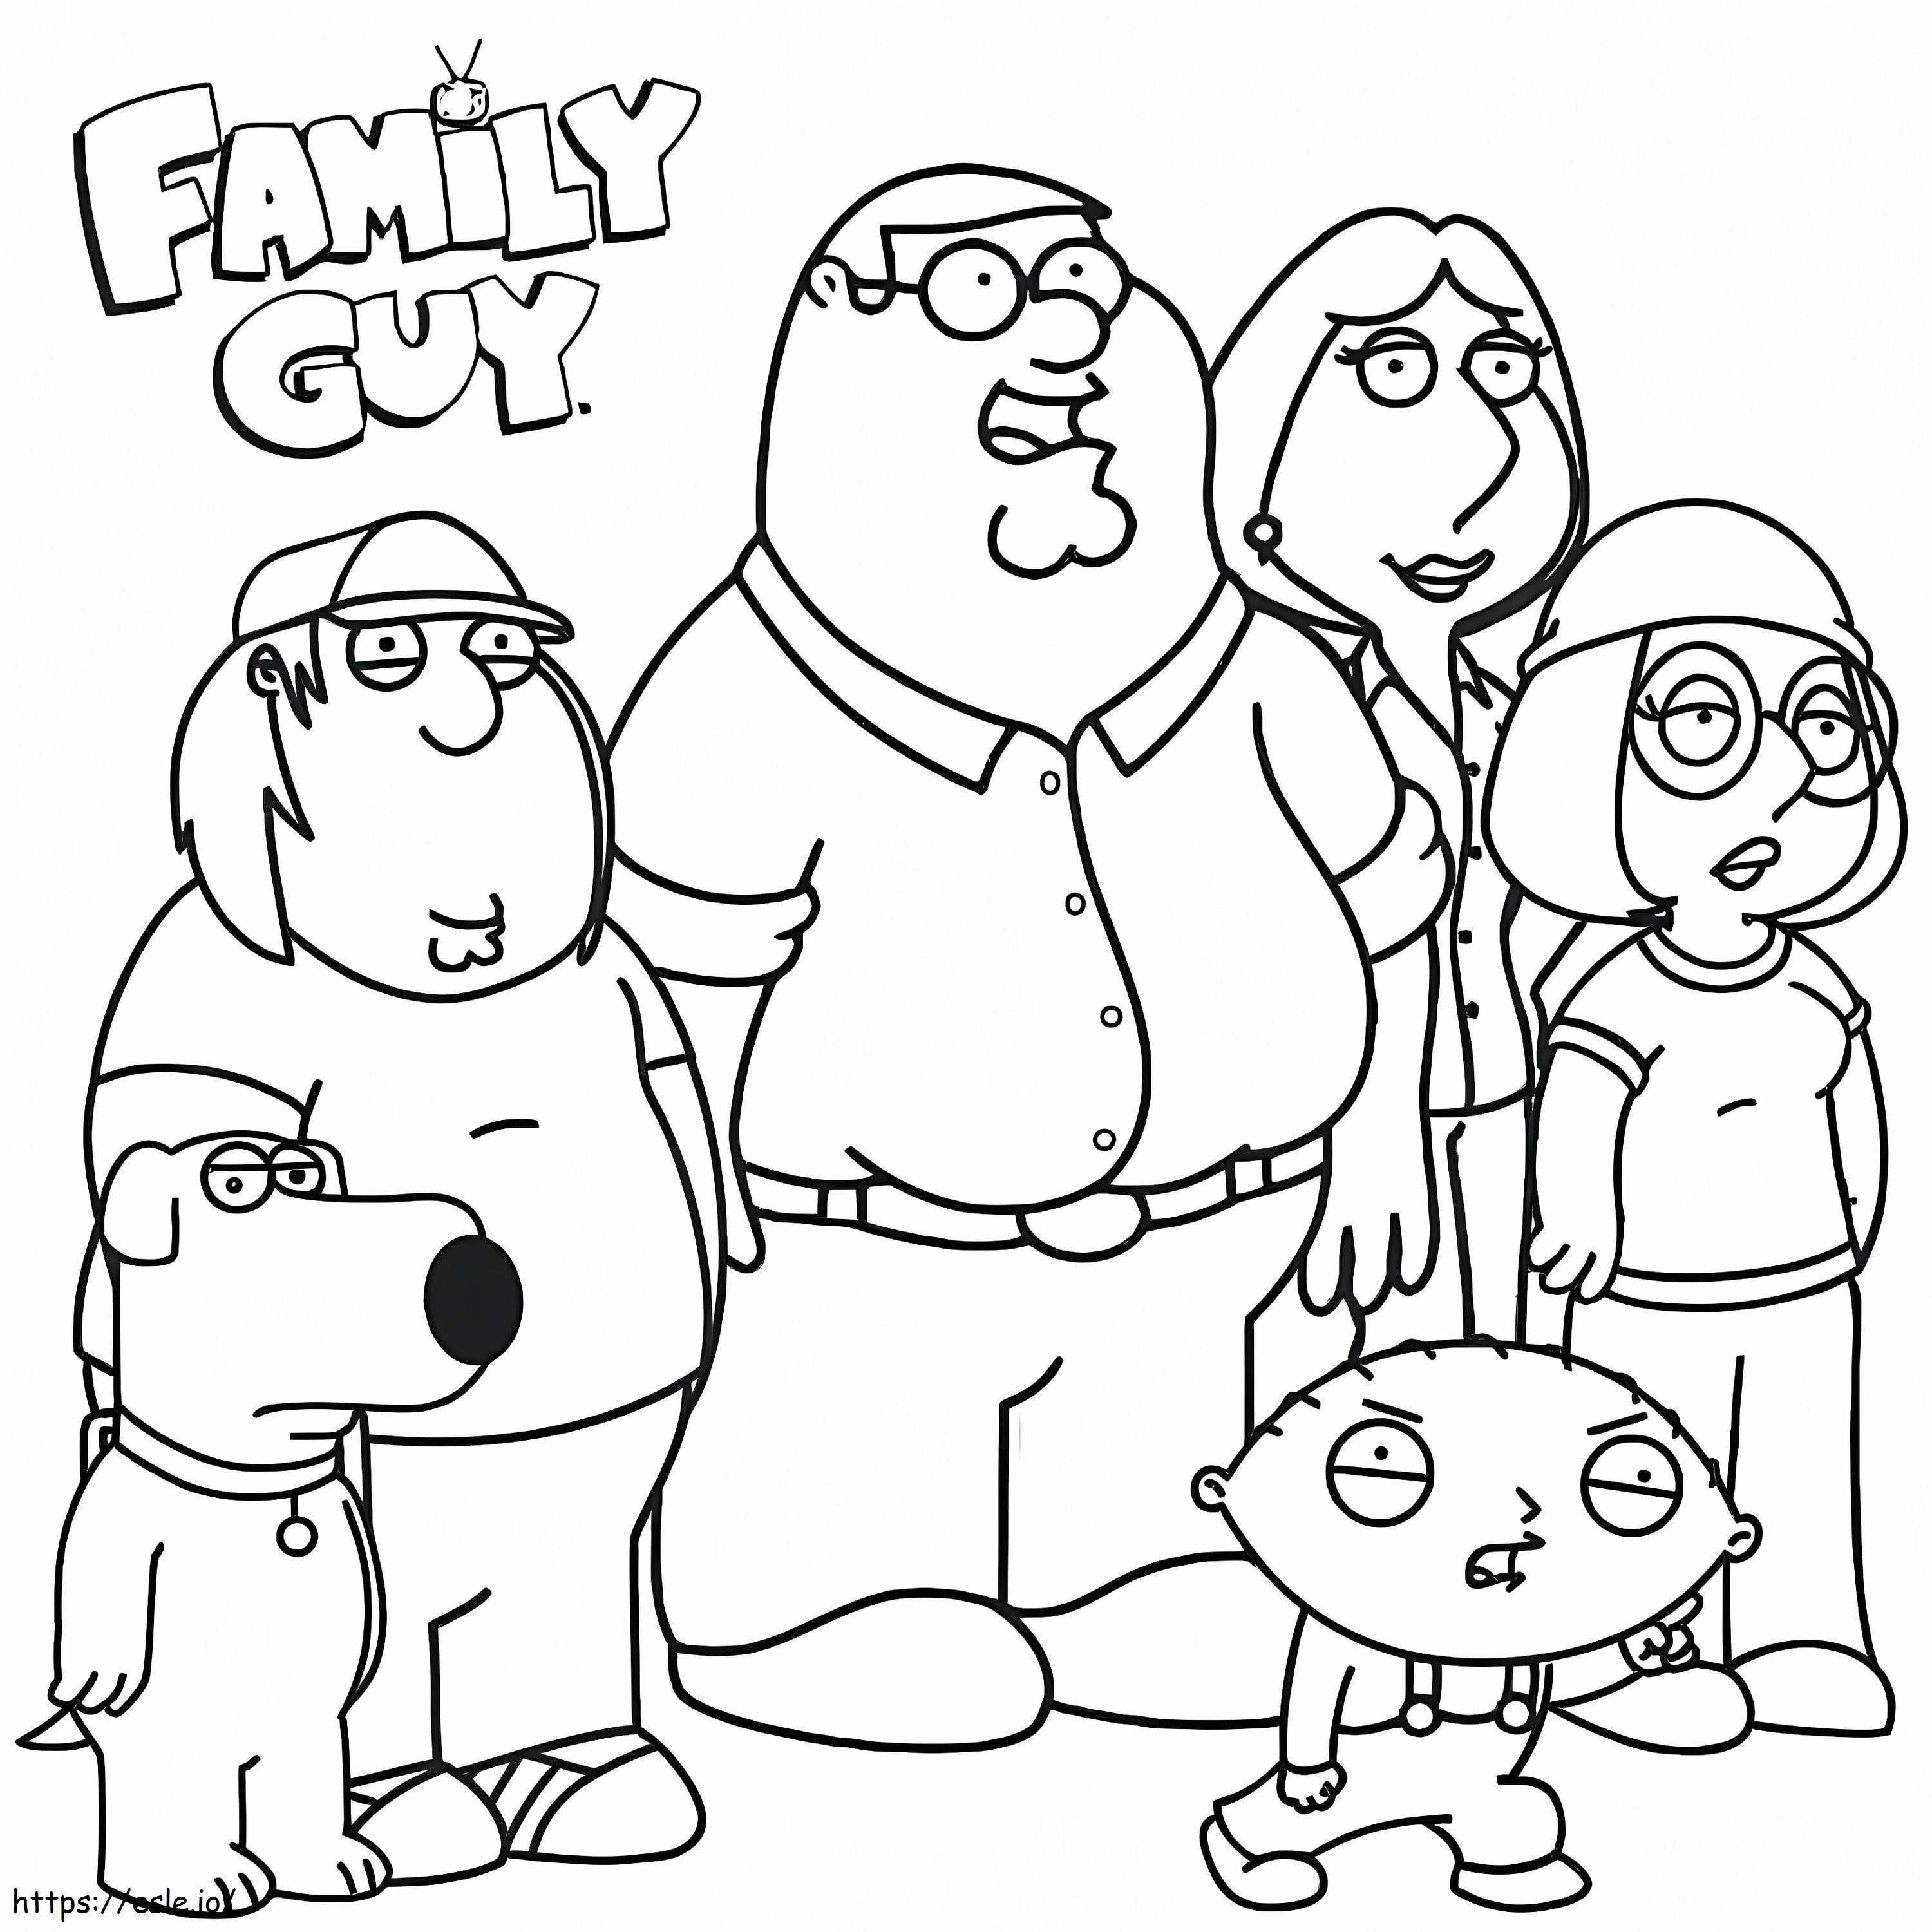 Family Man coloring page